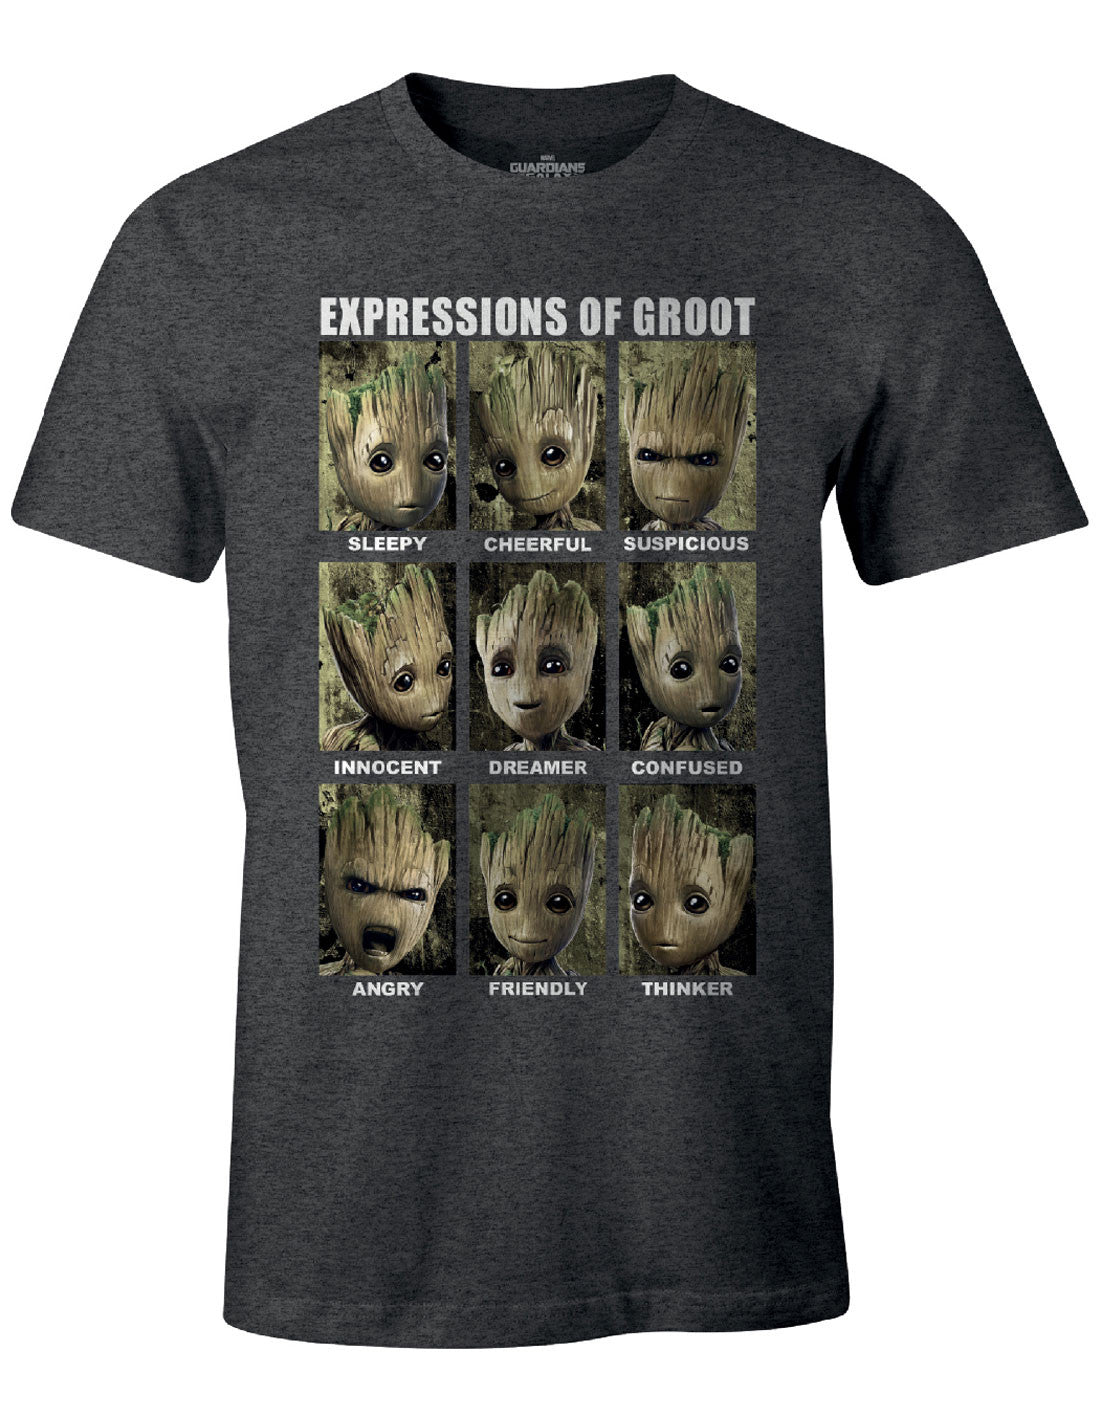 Guardians of the Galaxy Marvel T-shirt - Expressions of Groot